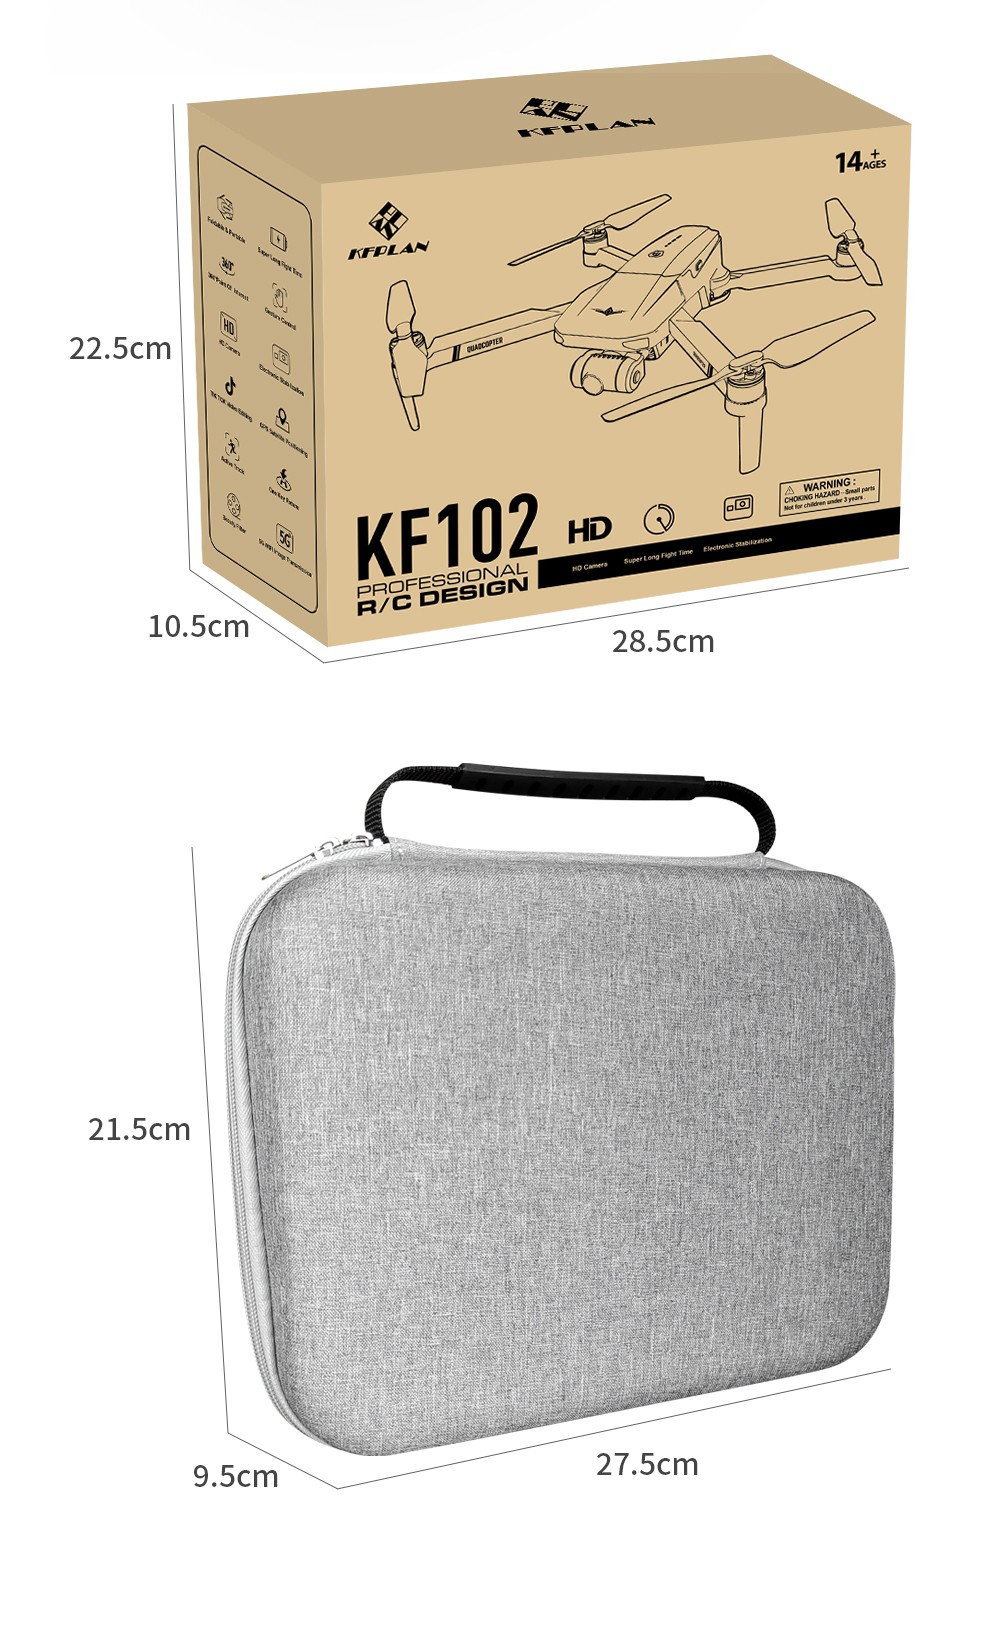 KF102 6K Camera GPS 5G WIFI FPV 2-Axis Self-stabilizing Mechanical Gimbal Brushless Foldable RC Drone - One Battery